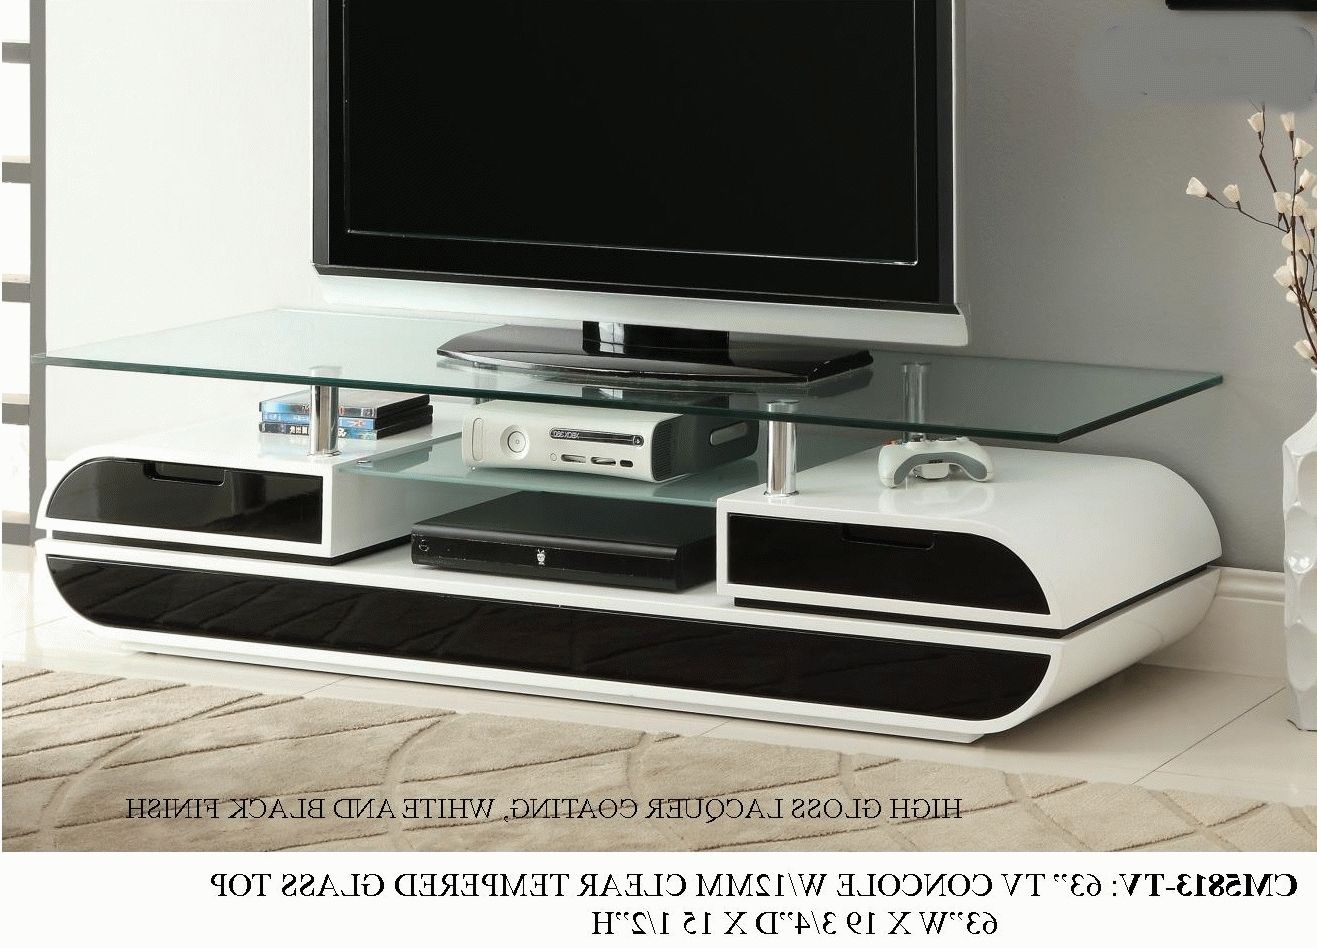 W5813 63" Tv Stand White And Black Lacquer Finish Within White And Black Tv Stands (View 1 of 15)